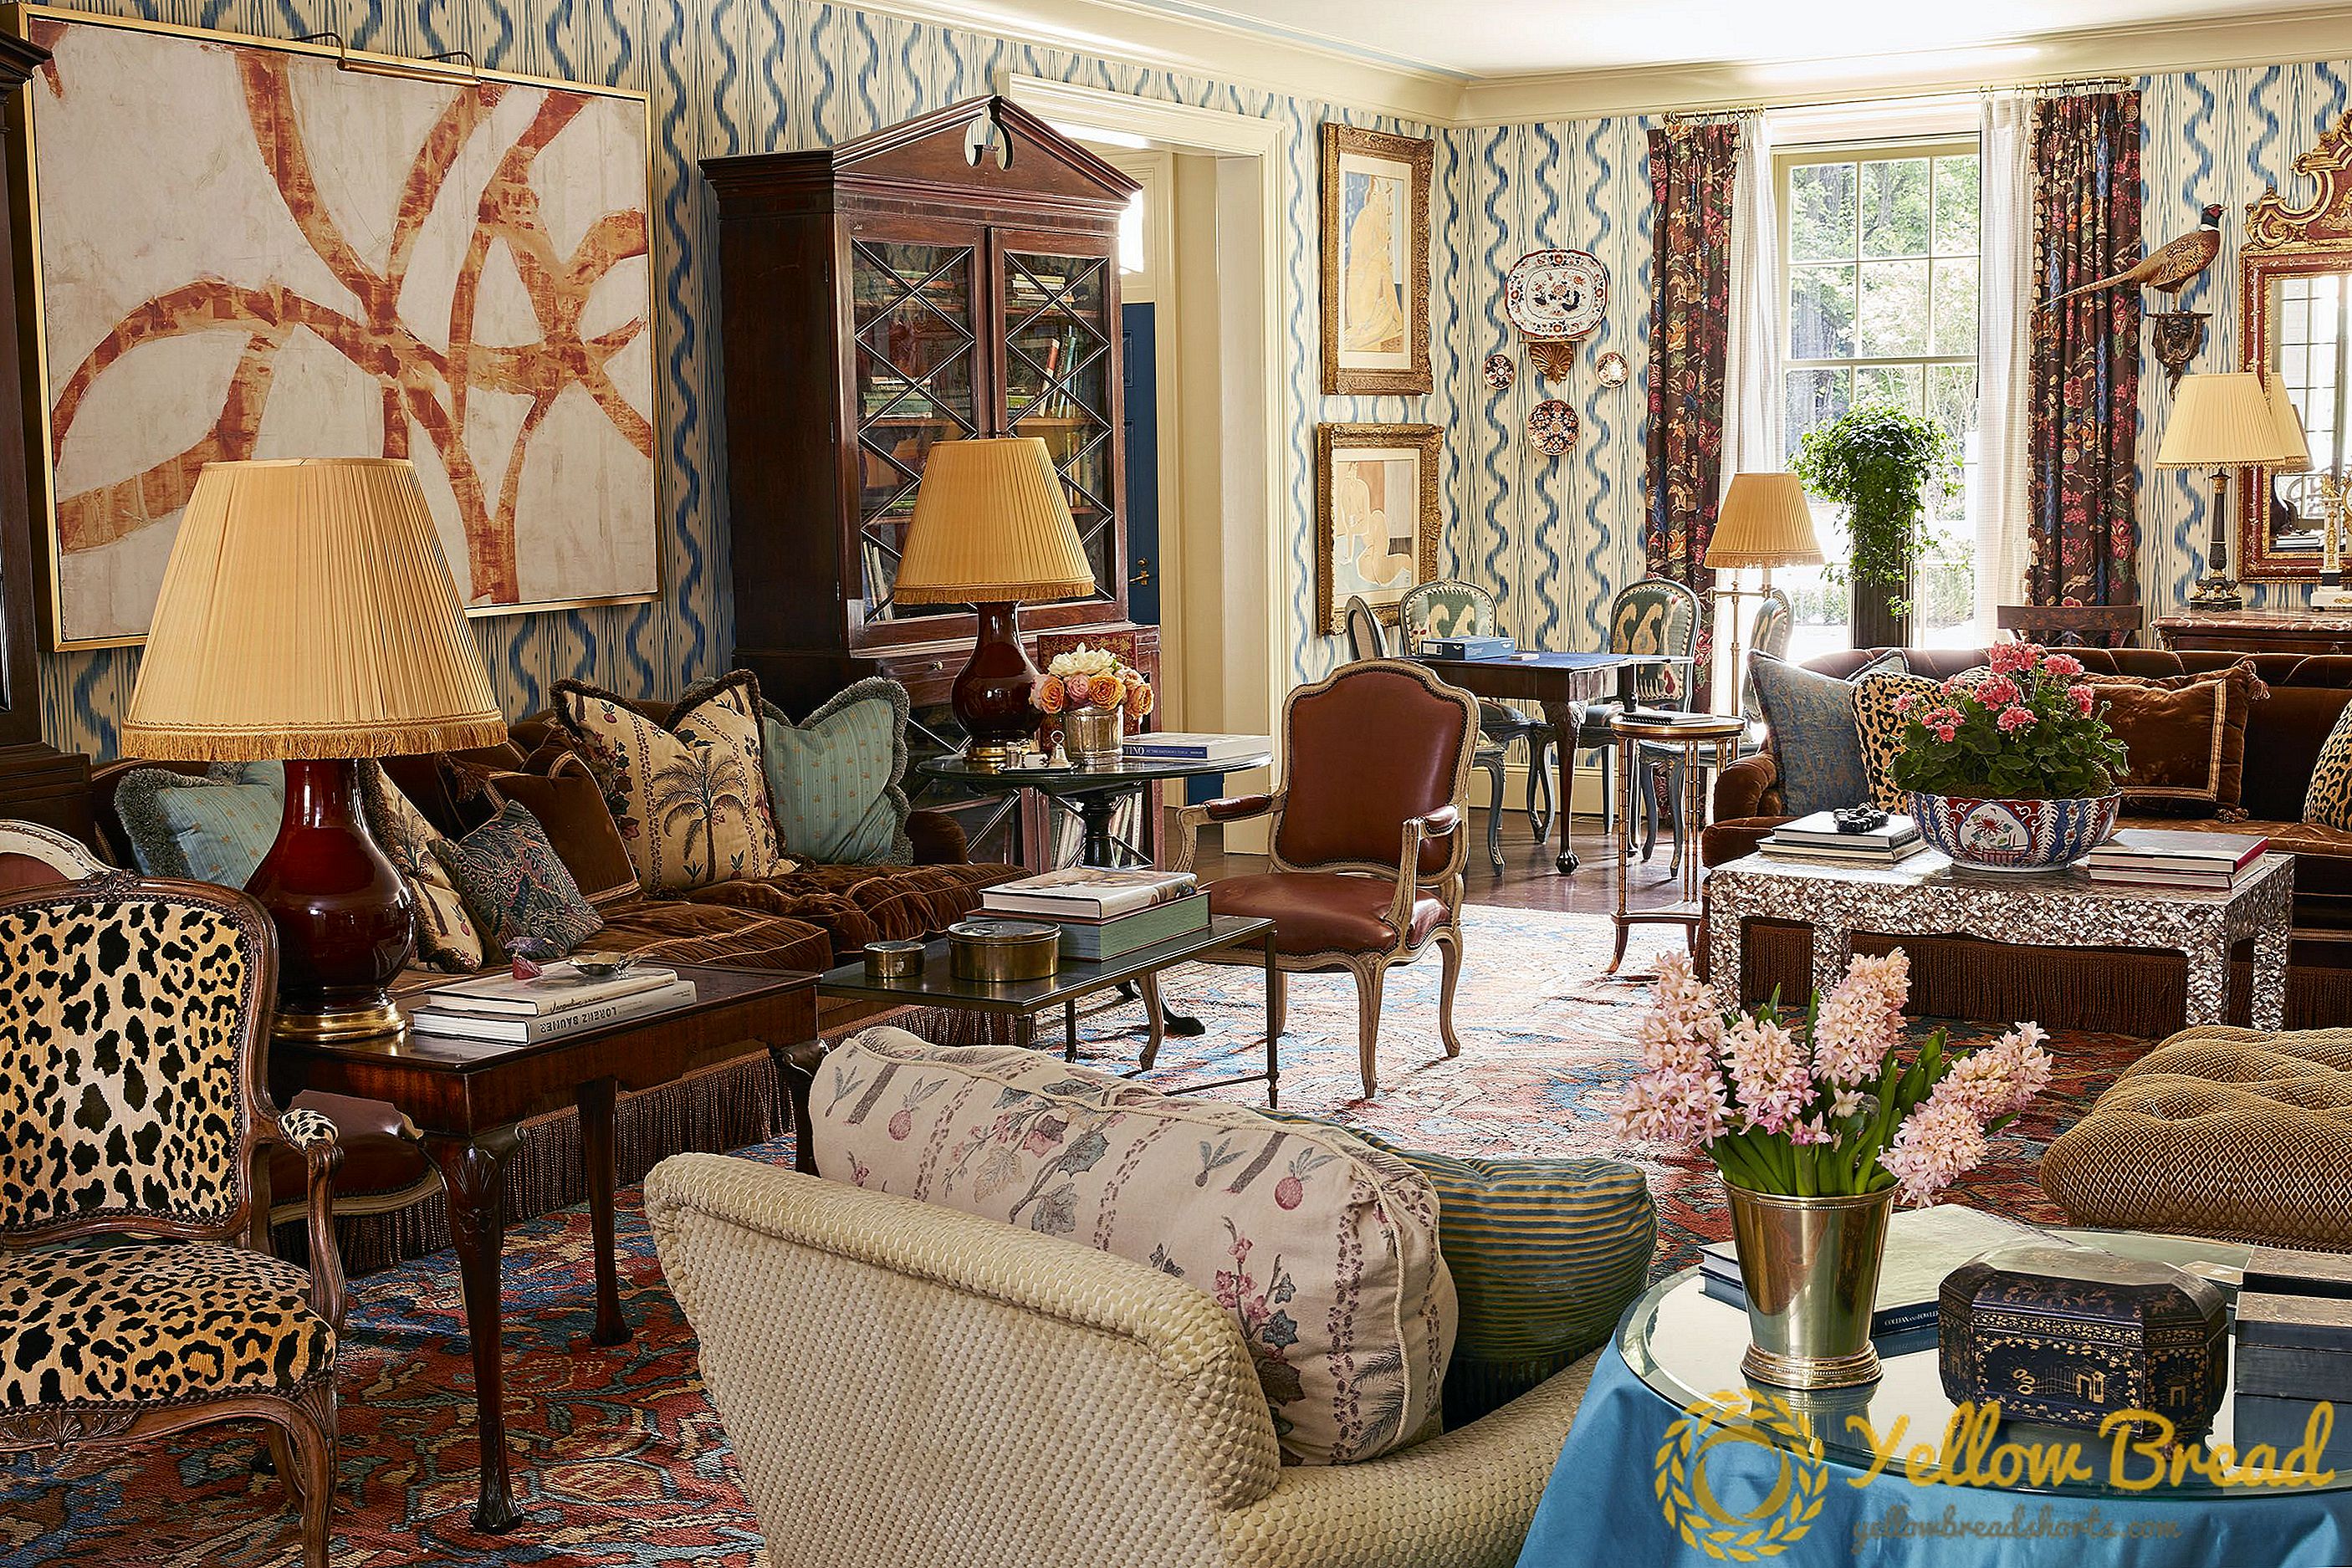 HOUSE TOUR: Trin Inside The Playful Home Of A Glamourous Atlanta Tastemaker